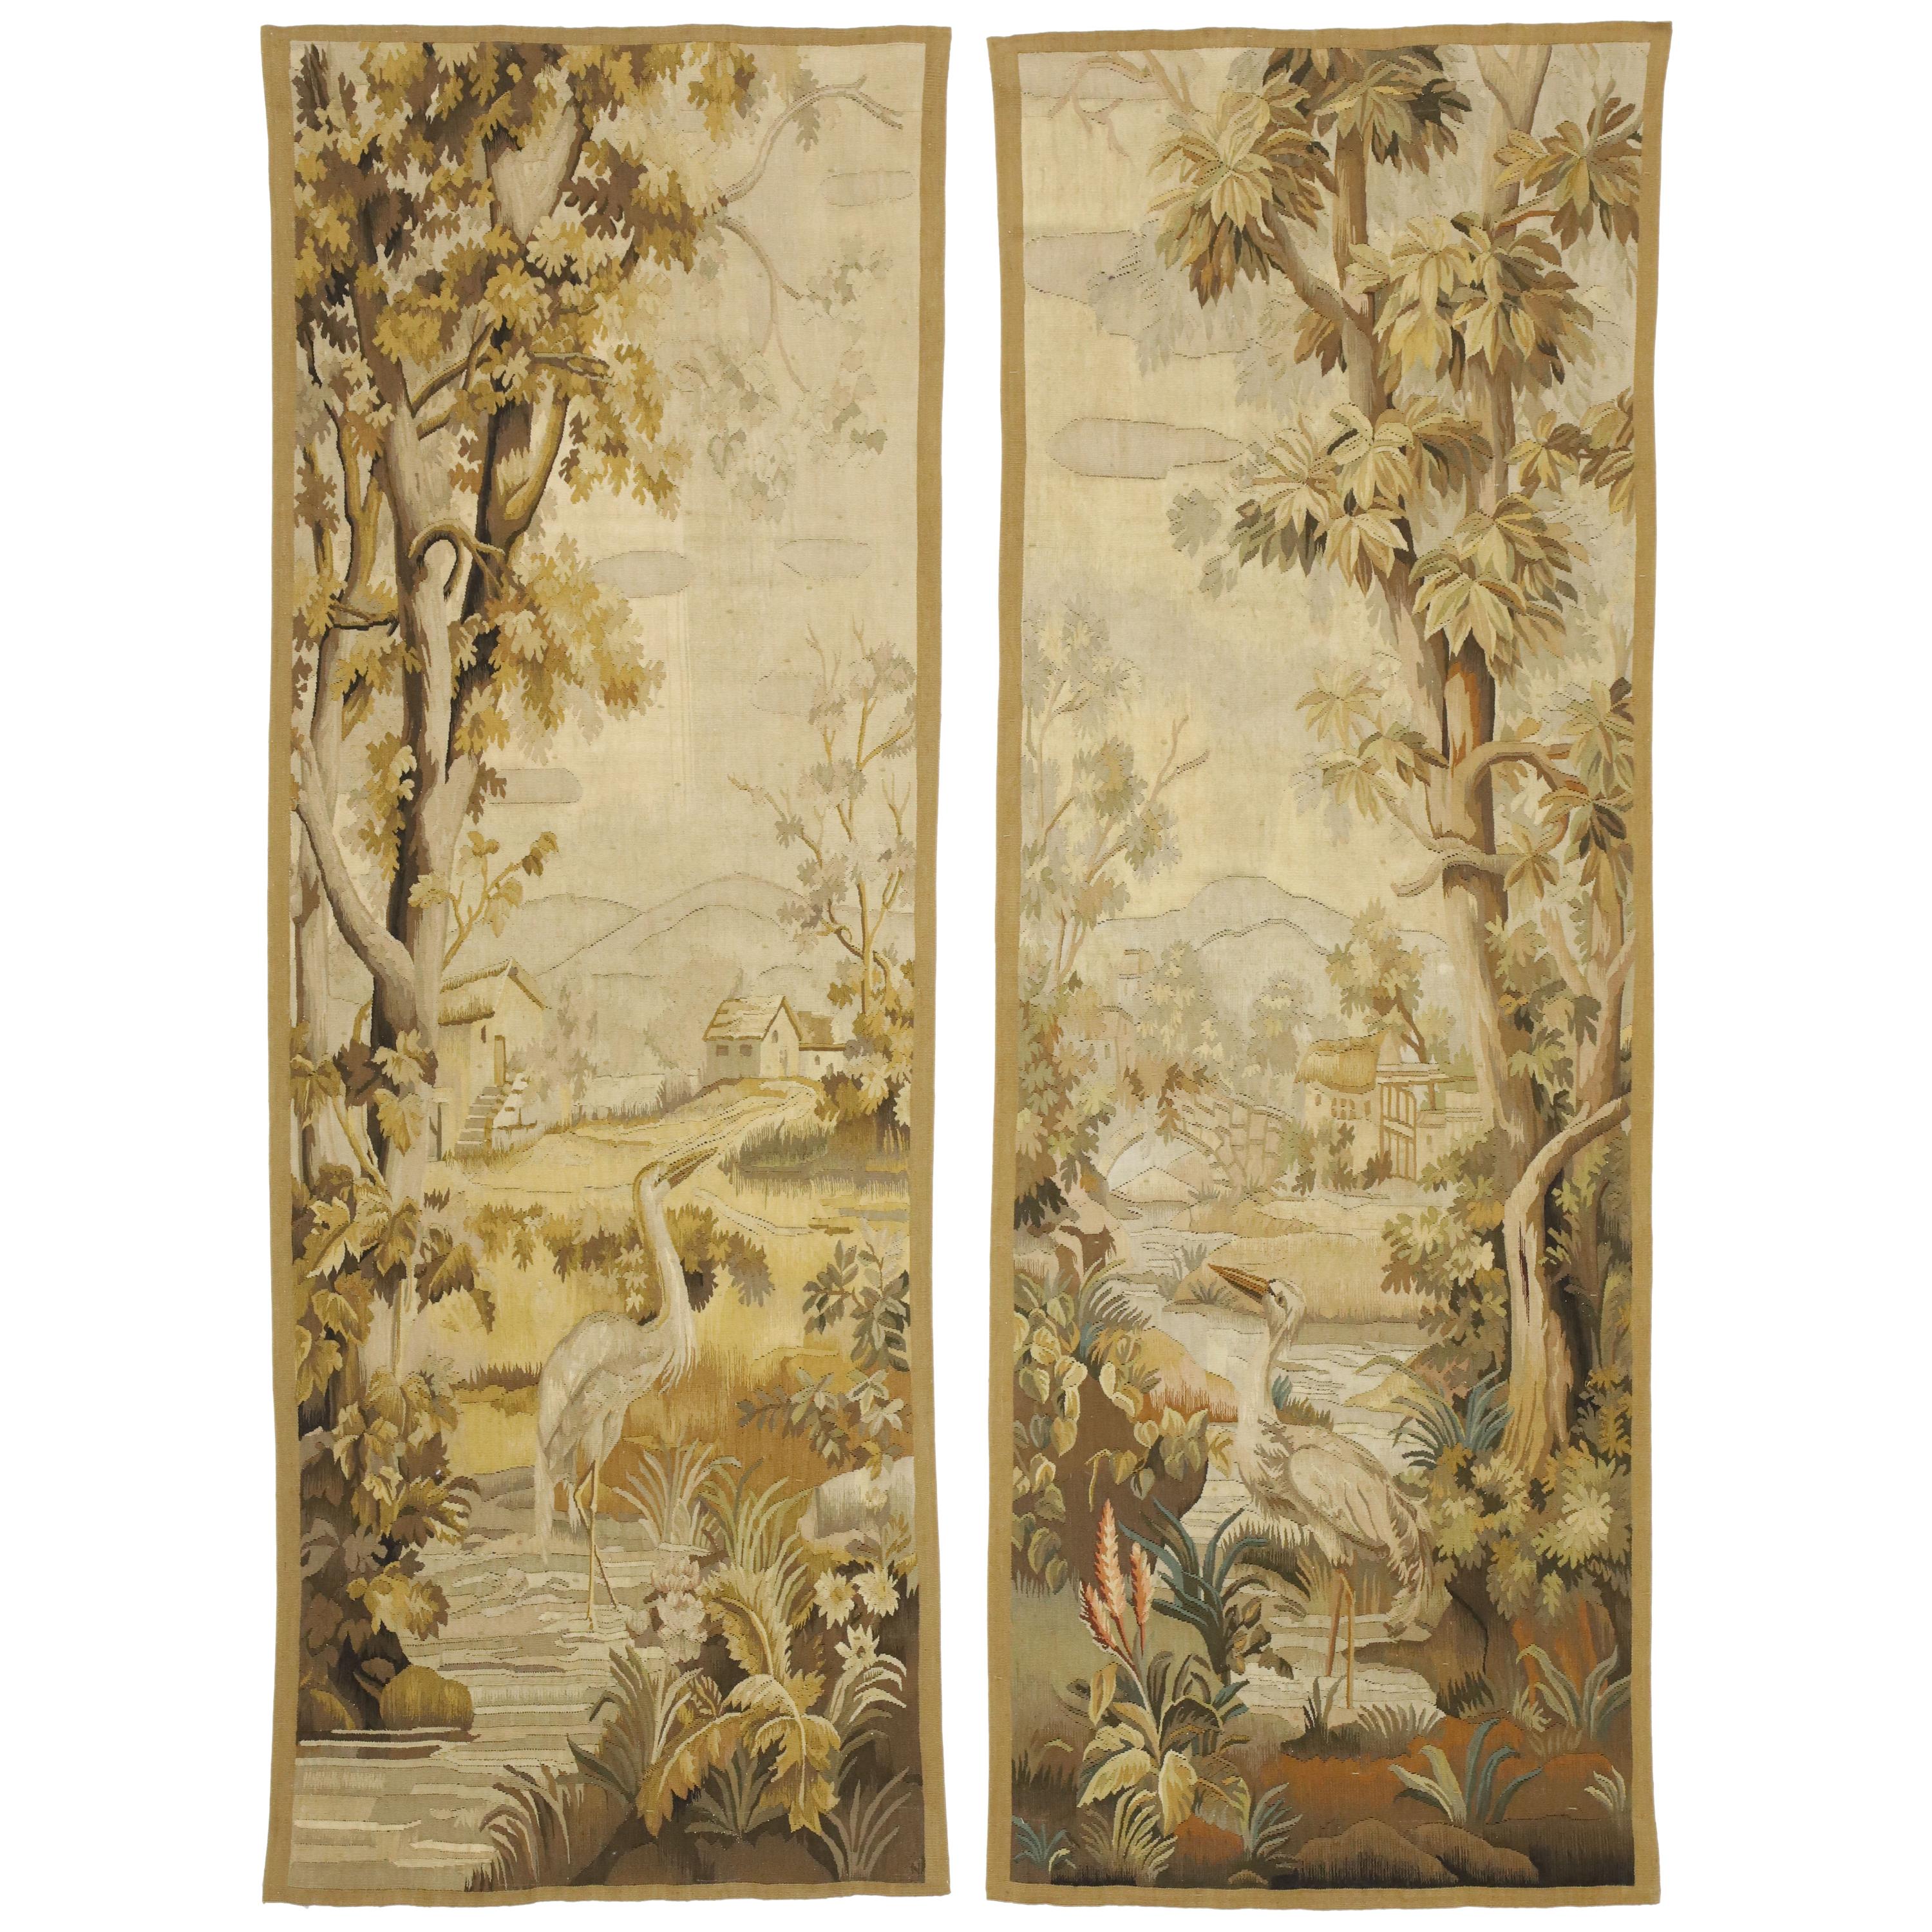 Pair of Antique French Aubusson Flemish Tapestries with Verdure Landscape Scene